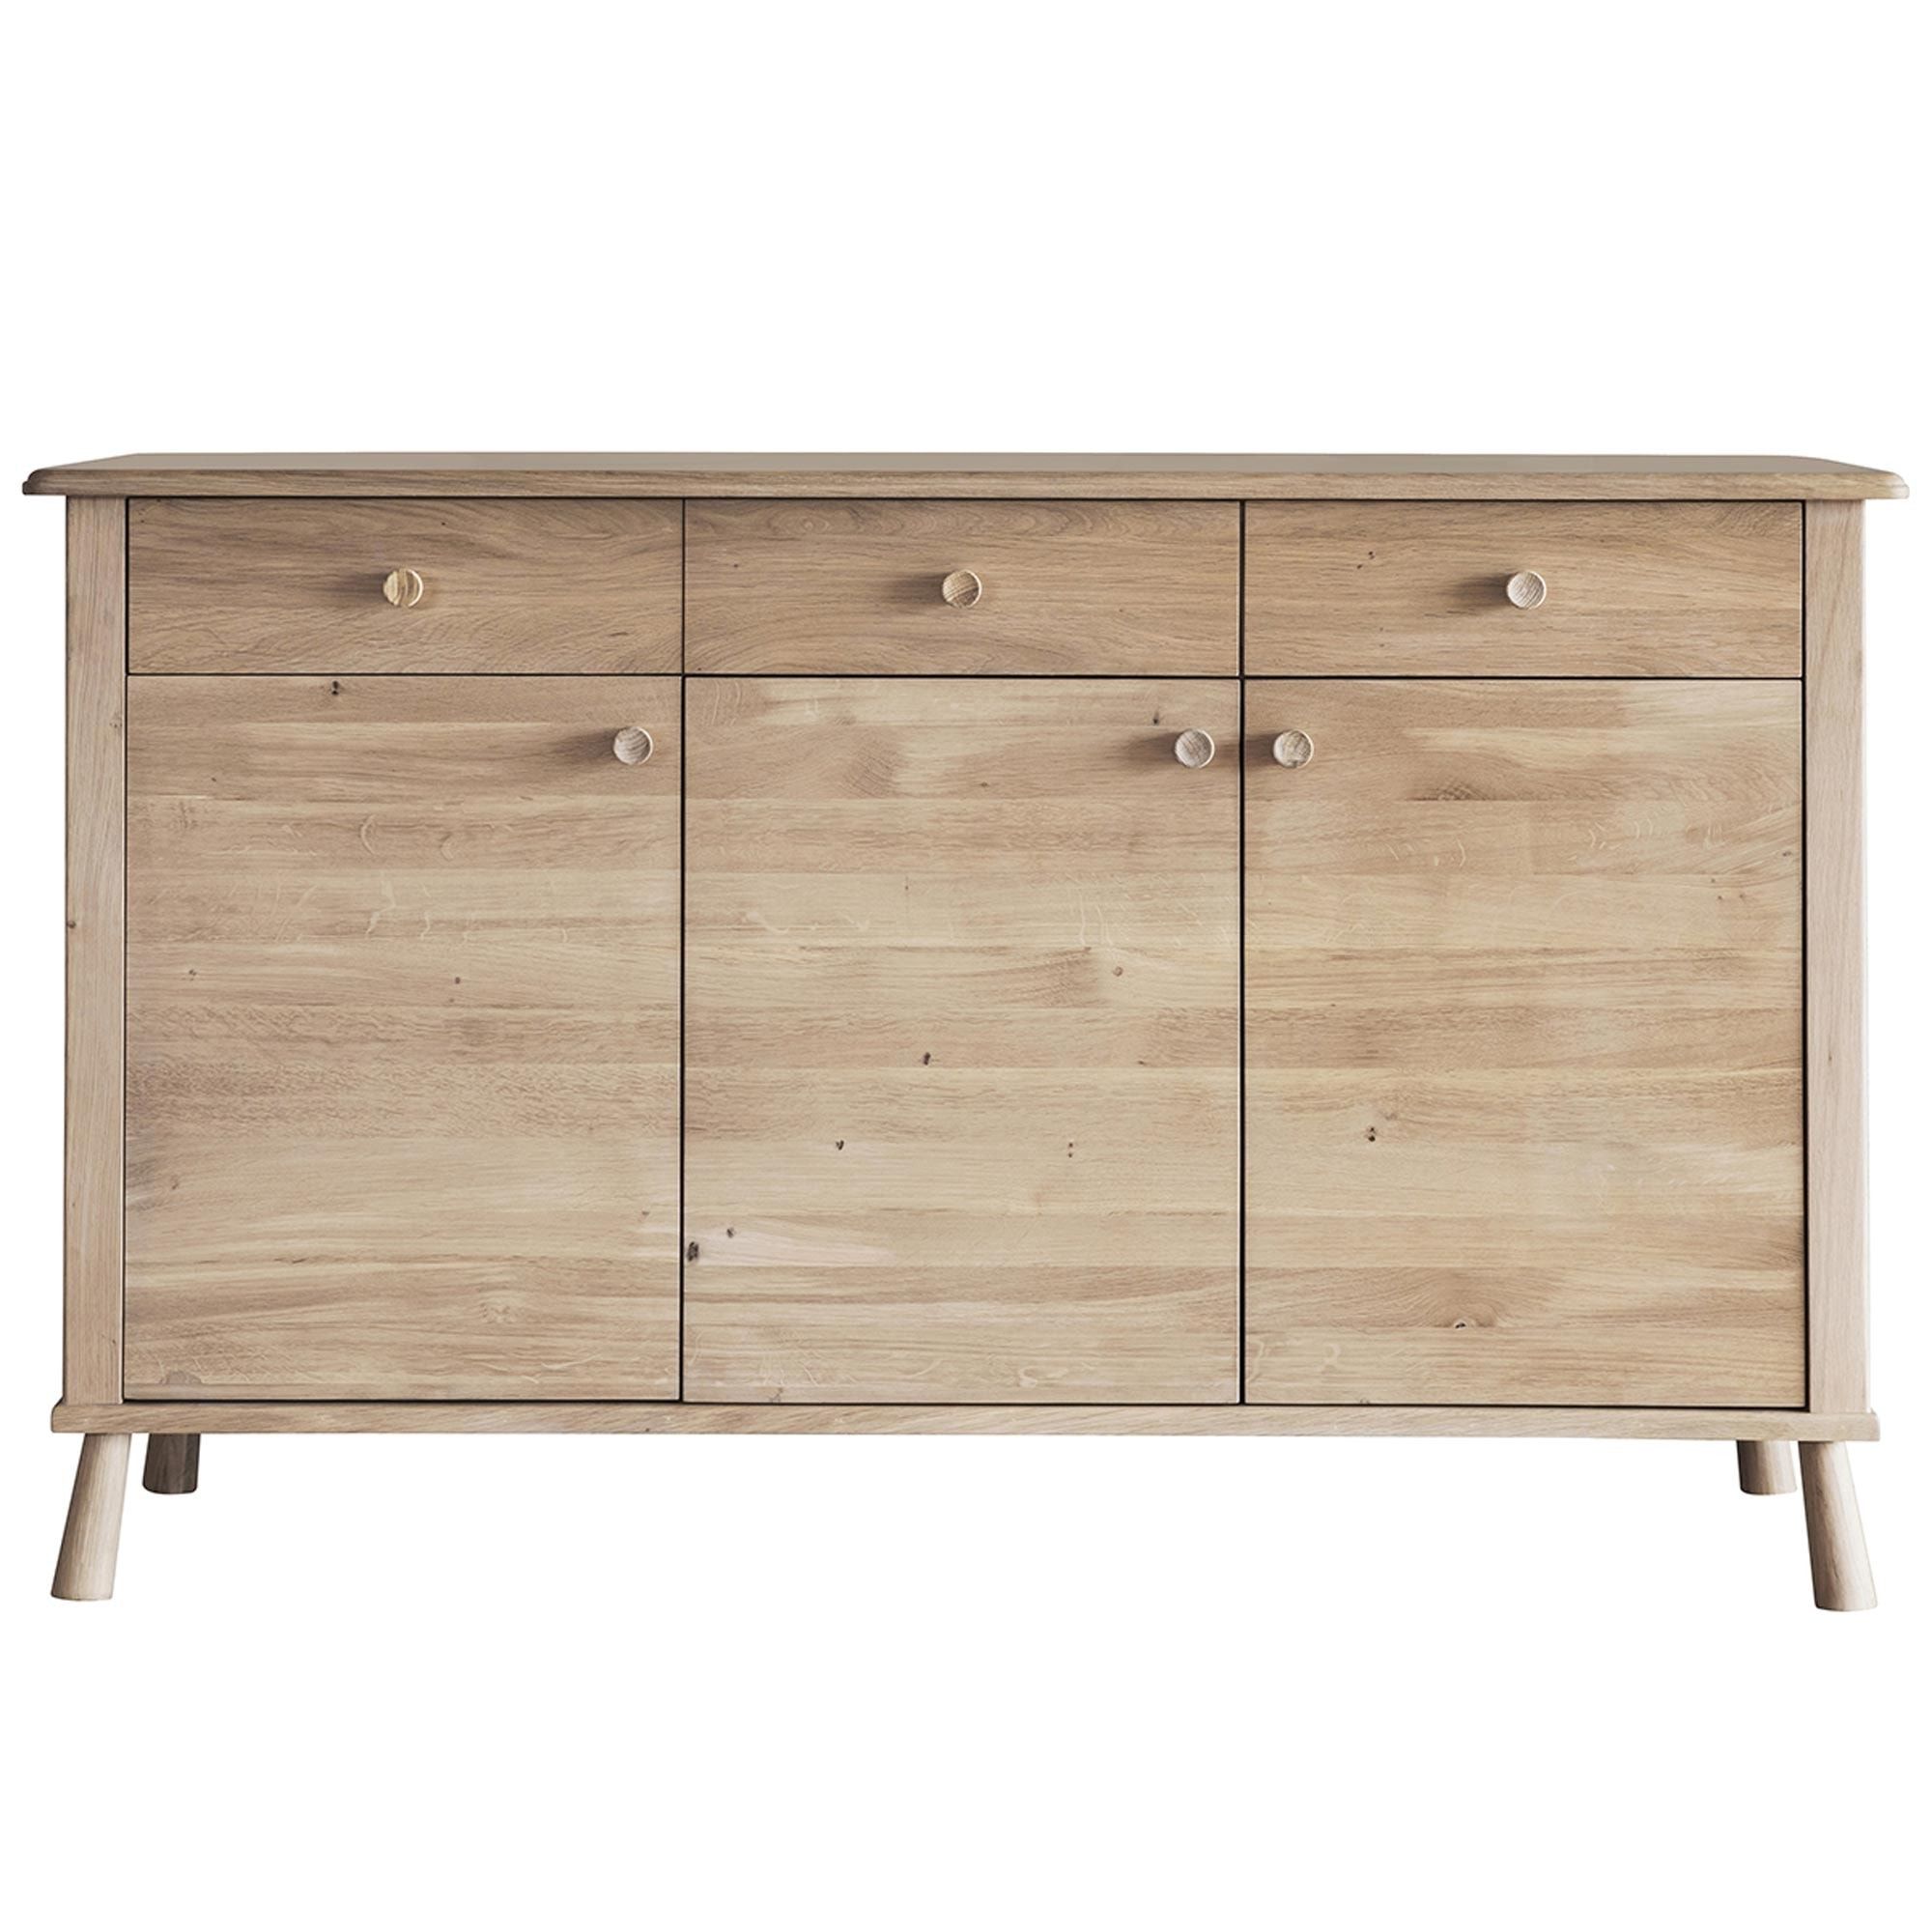 Wycombe 3 Door 3 Drawer Sideboard | Wooden Sideboards With Storage Throughout 3 Drawer Sideboards (Gallery 18 of 20)